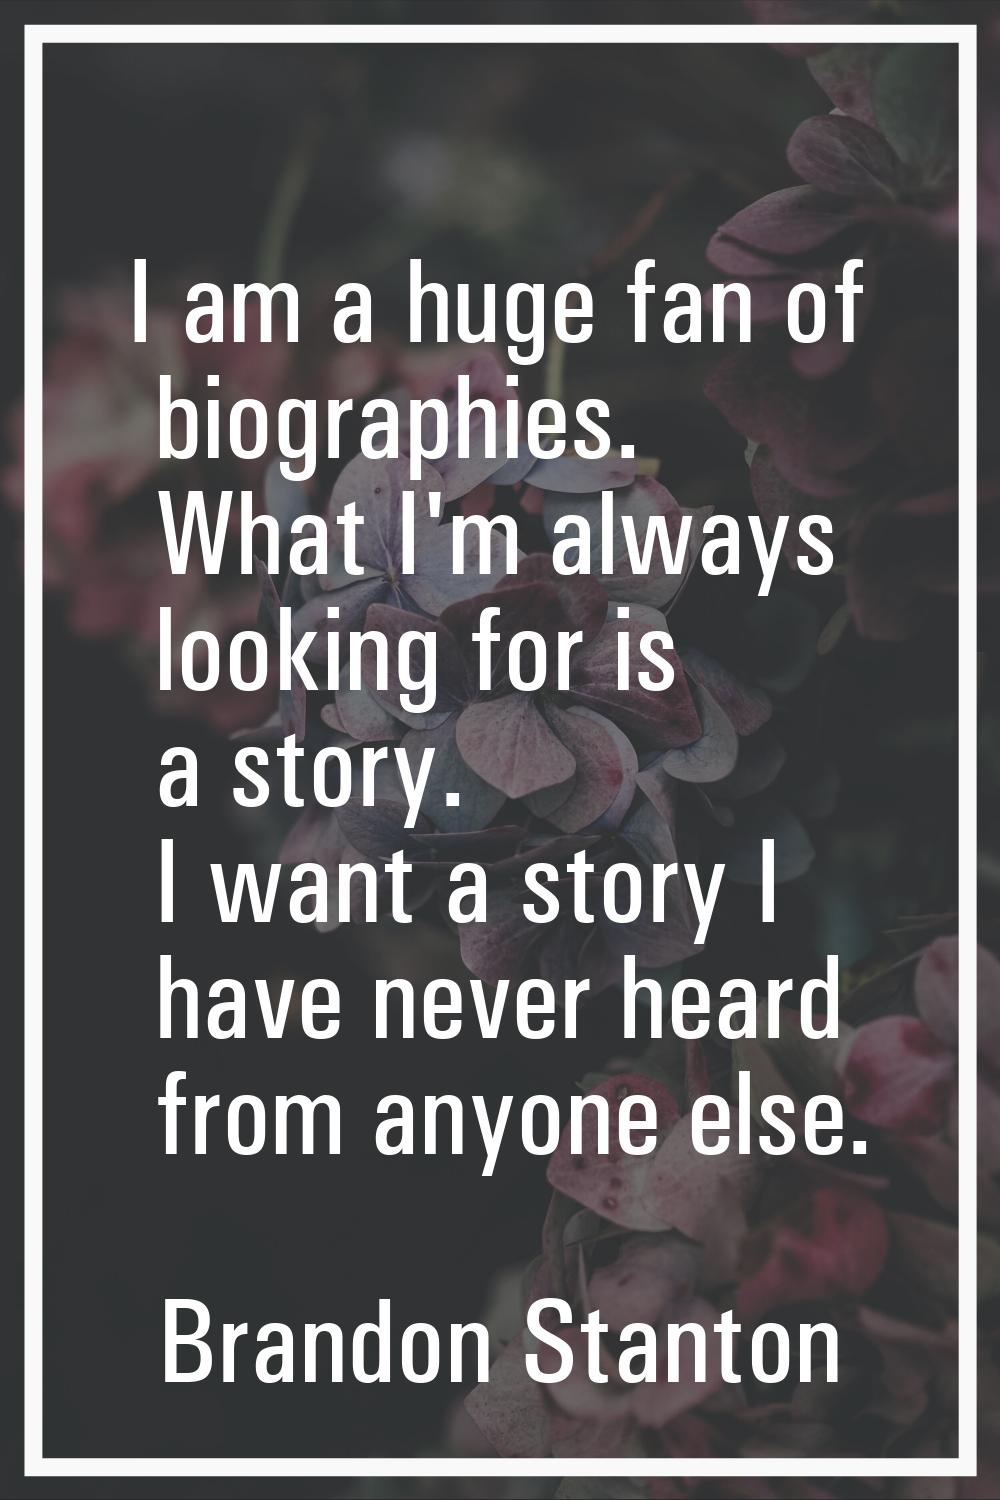 I am a huge fan of biographies. What I'm always looking for is a story. I want a story I have never